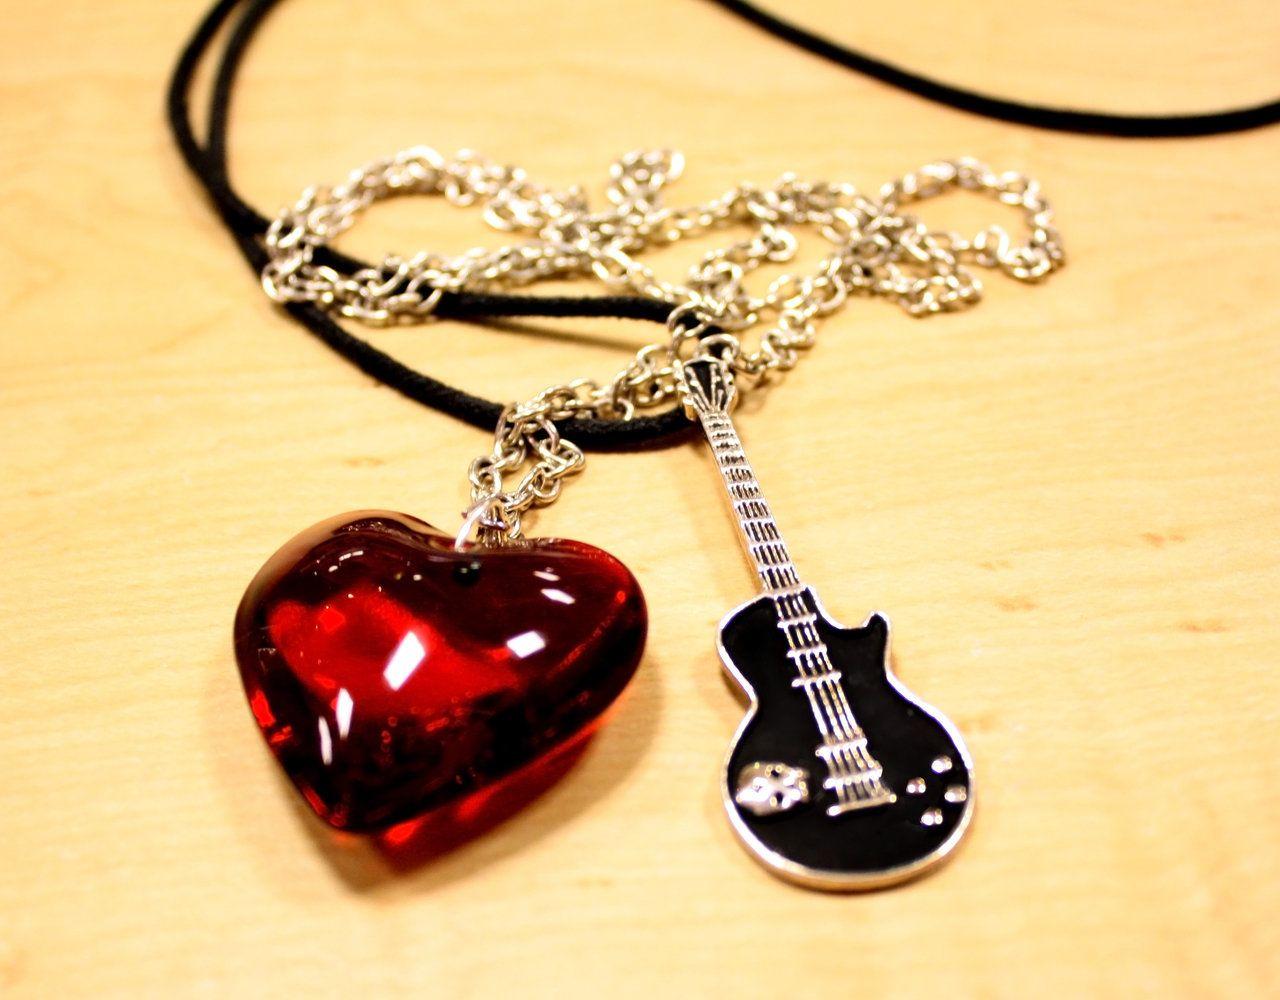 I Love Rock Music Necklace Picture, Photo, and Image for Facebook